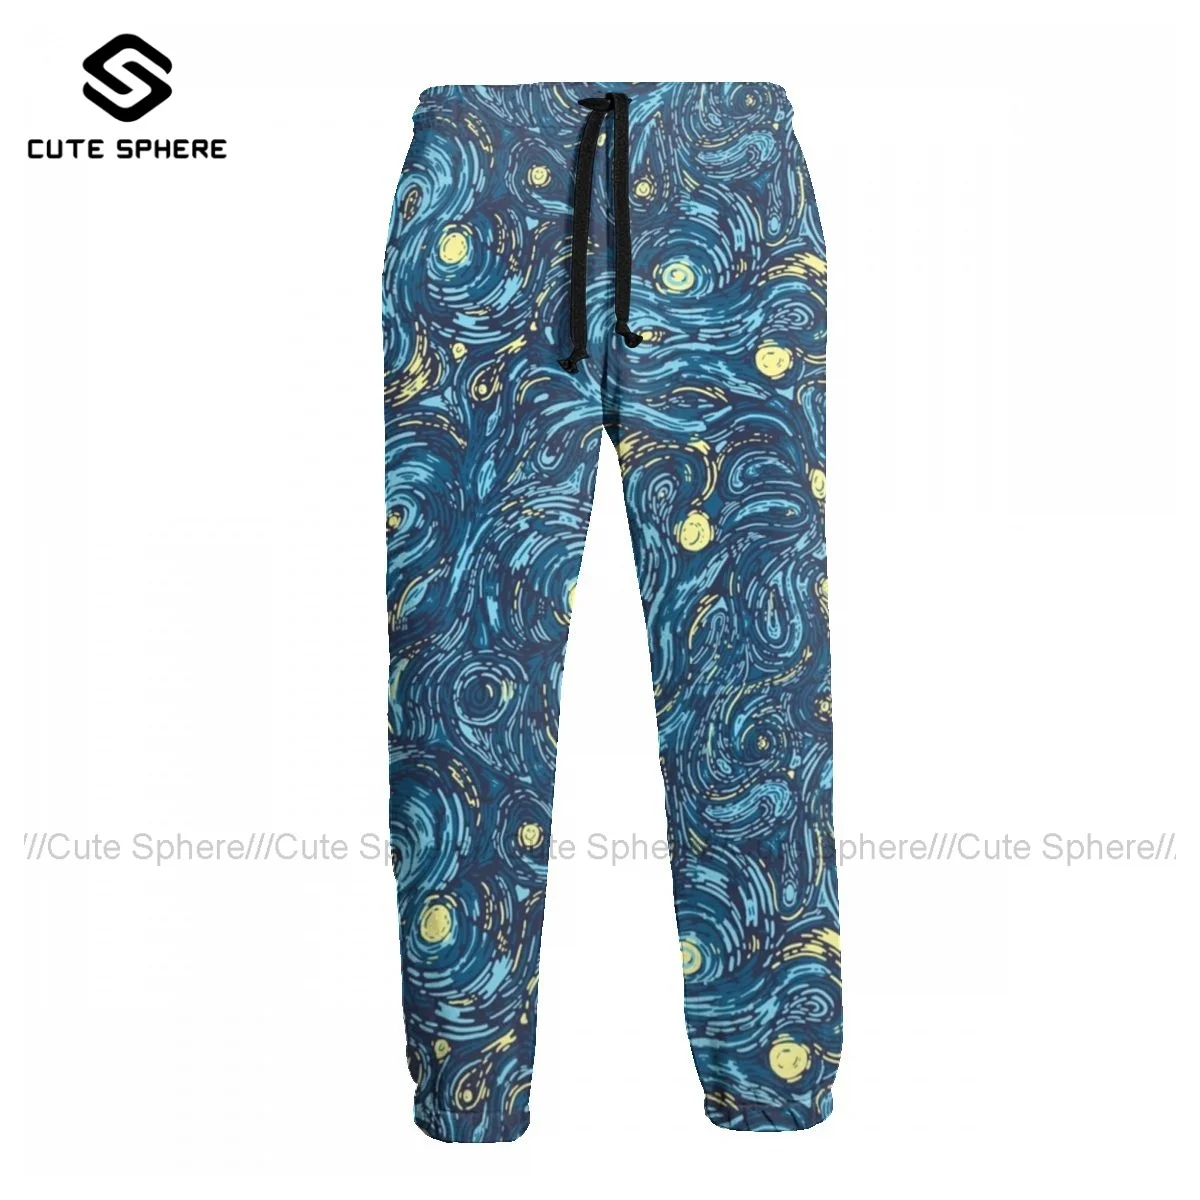 

Van Gogh Starry Night Sweatpants Fashion Comfy Joggers Male Basketball Polyester Casual Pants